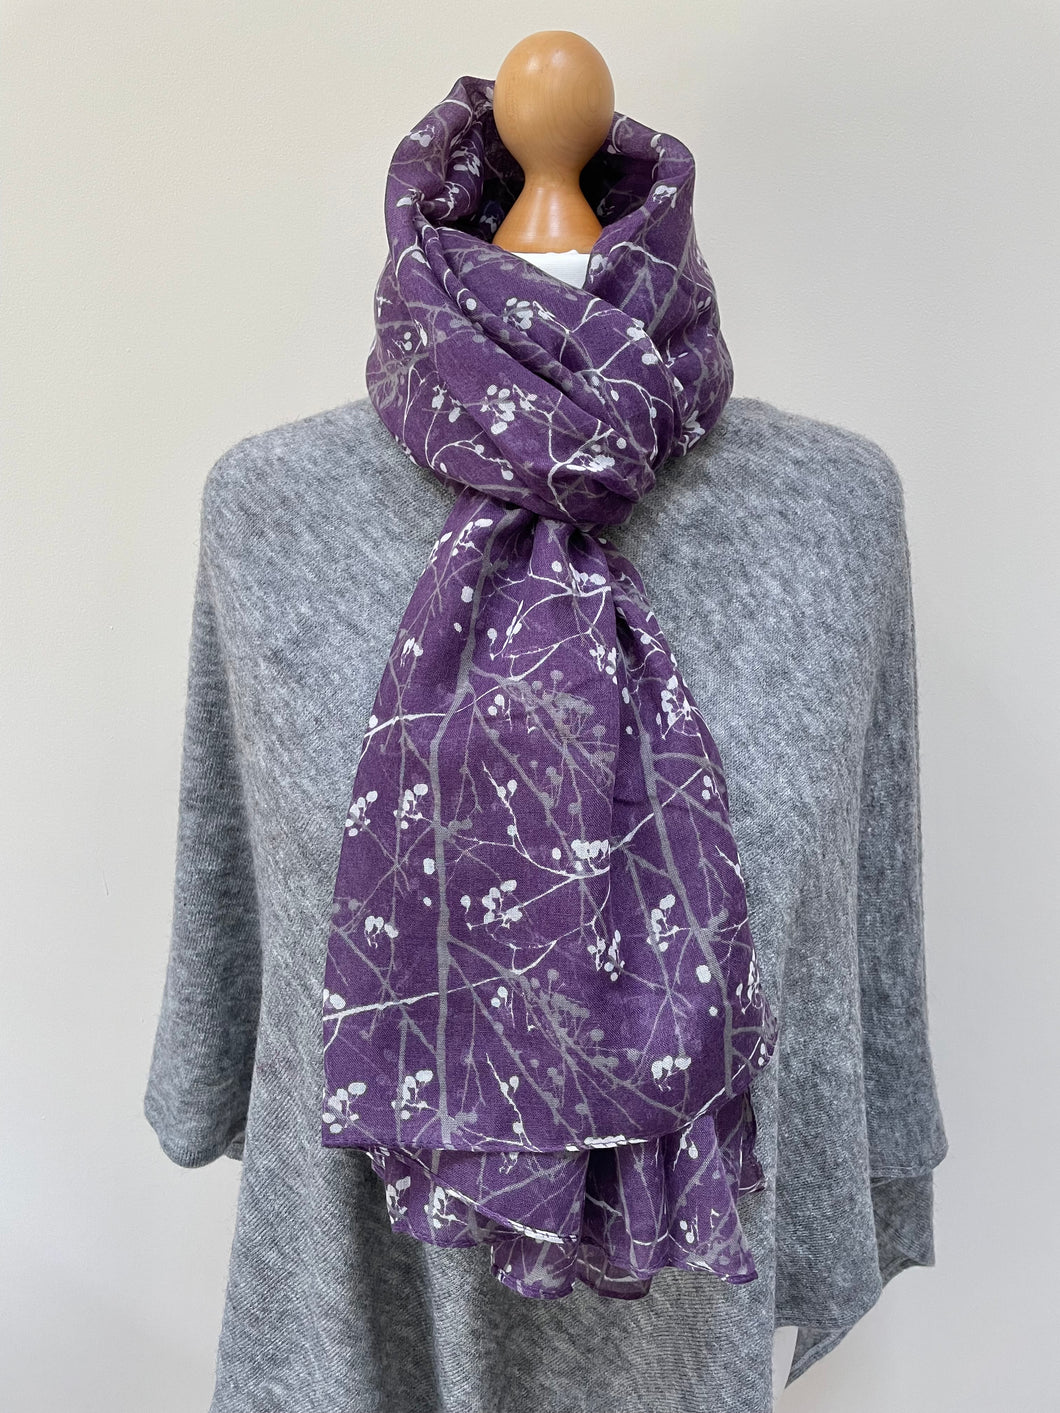 Summer and Winter Purple Branch and Berry Scarf